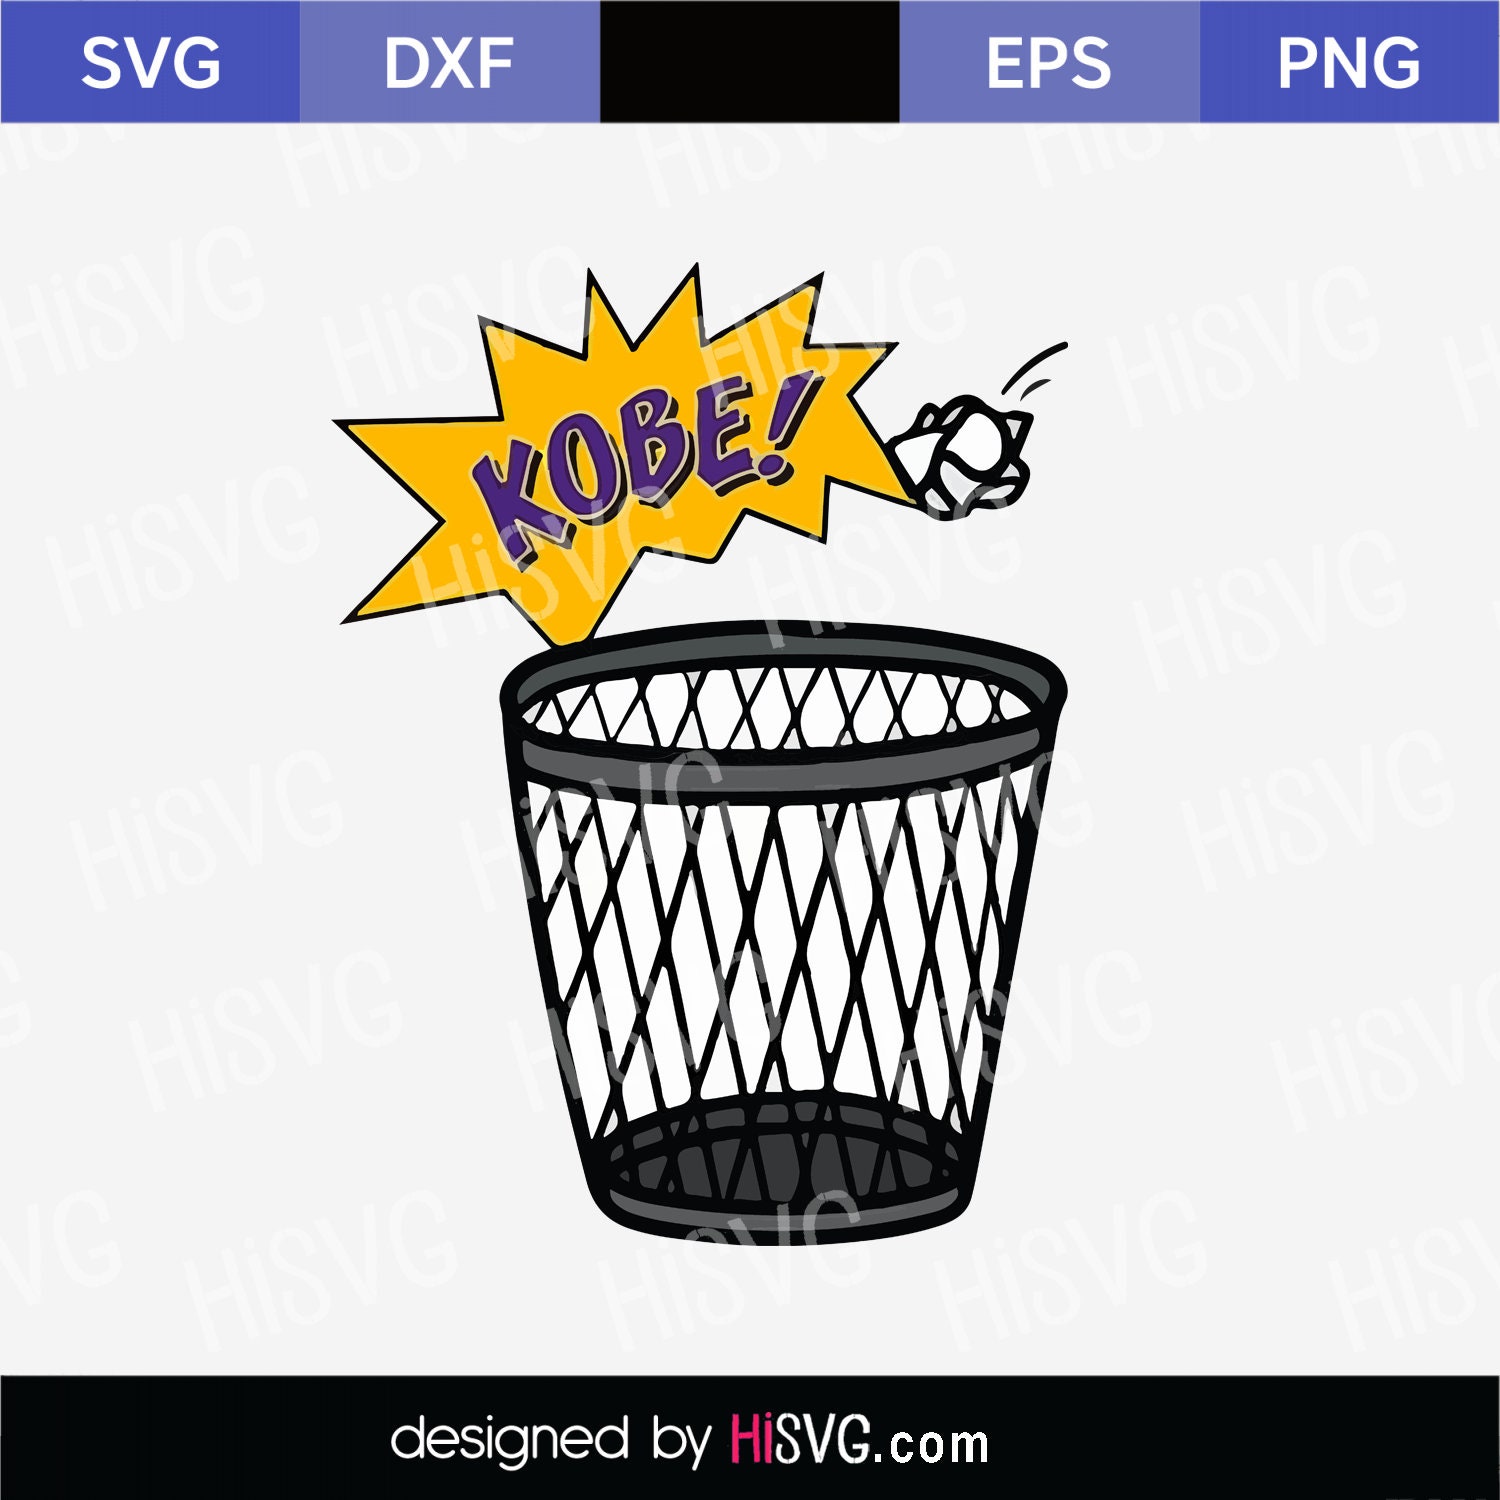 Download Kobe Bryant Svg Png For Cricut Silhouette Cut File Etsy